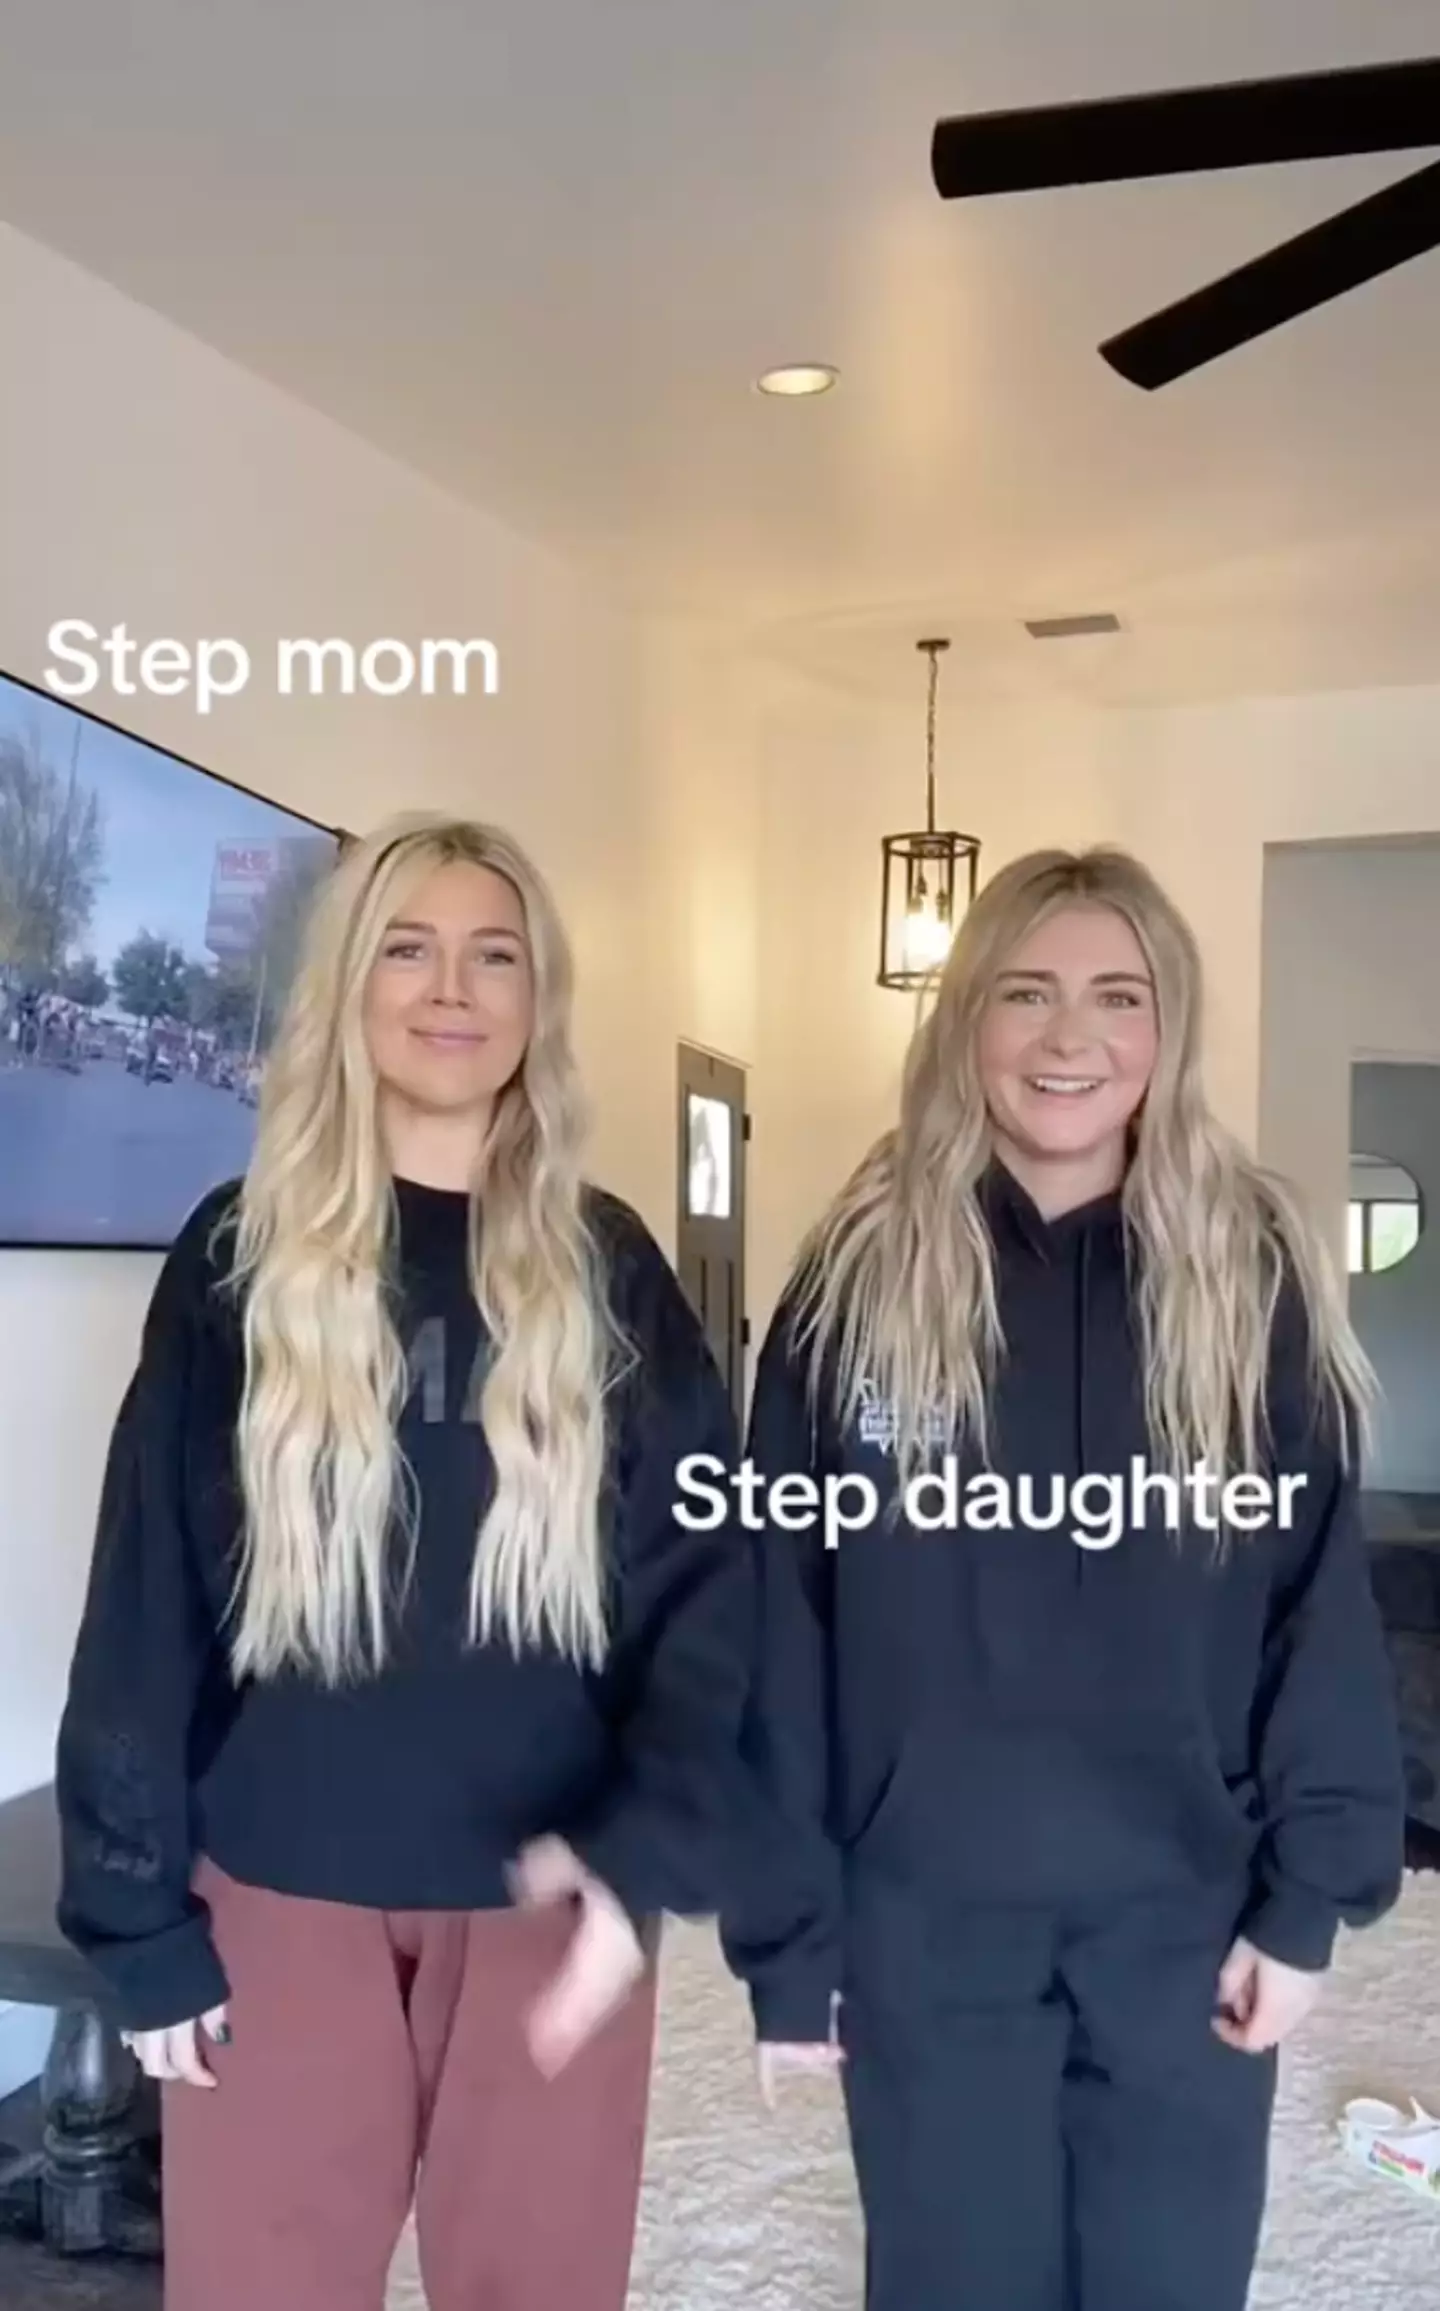 The pair regularly post about their family life on TikTok.